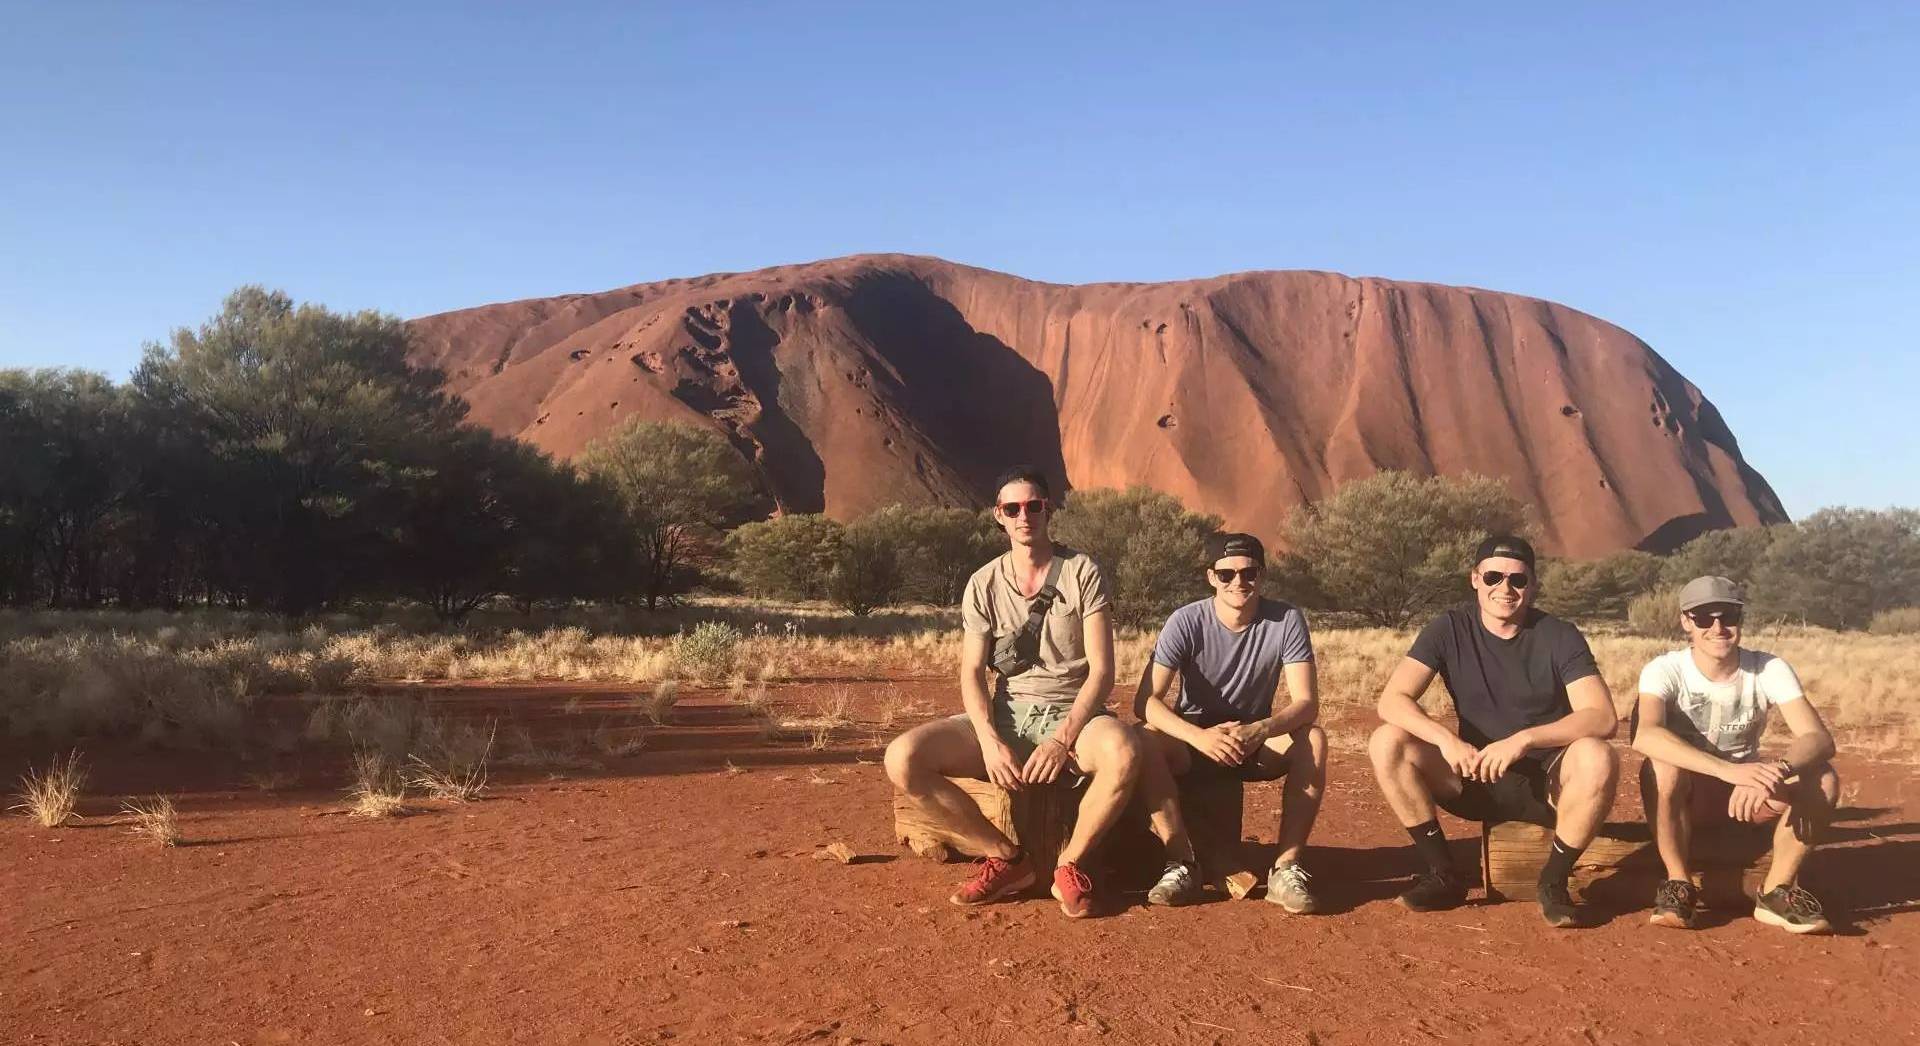 Students sitting in front of Ayers Rock in Australia